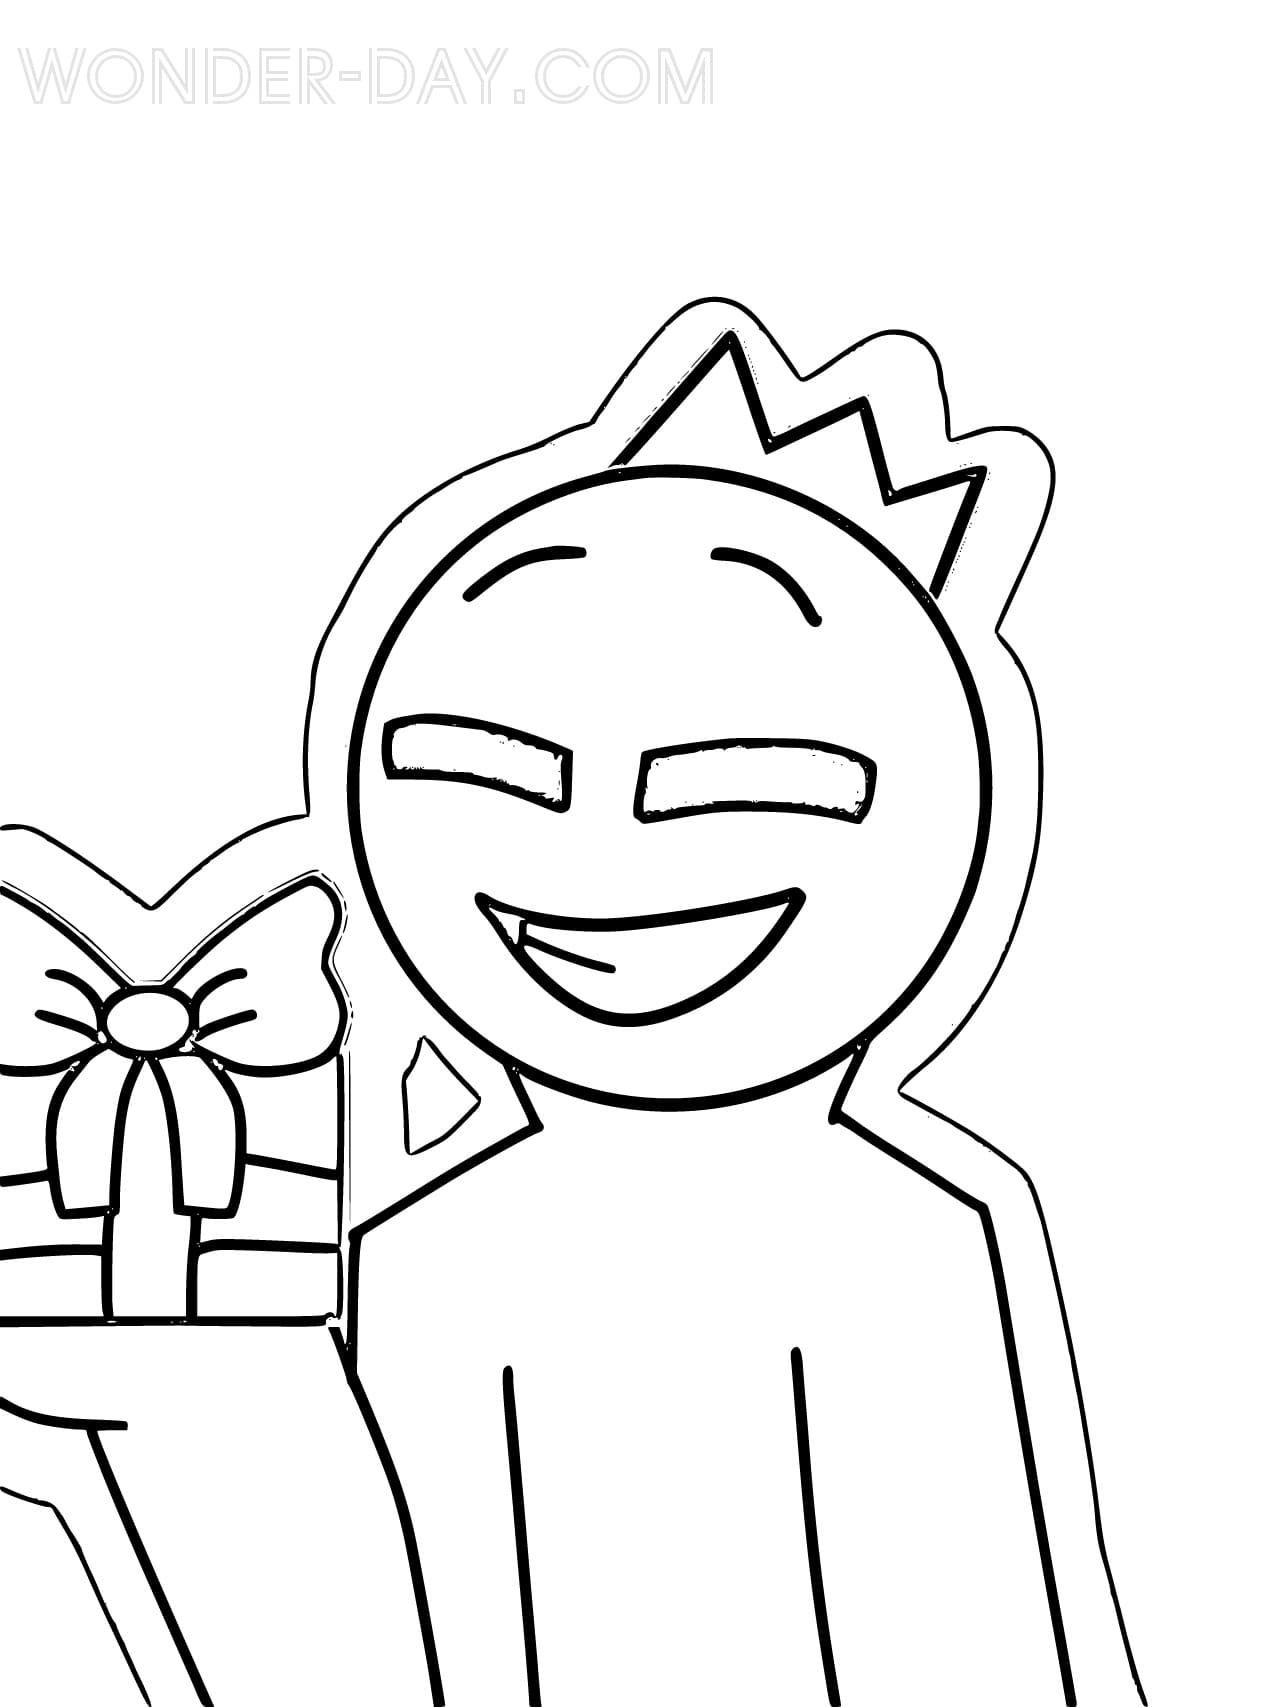 Rainbow Friends Coloring Pages